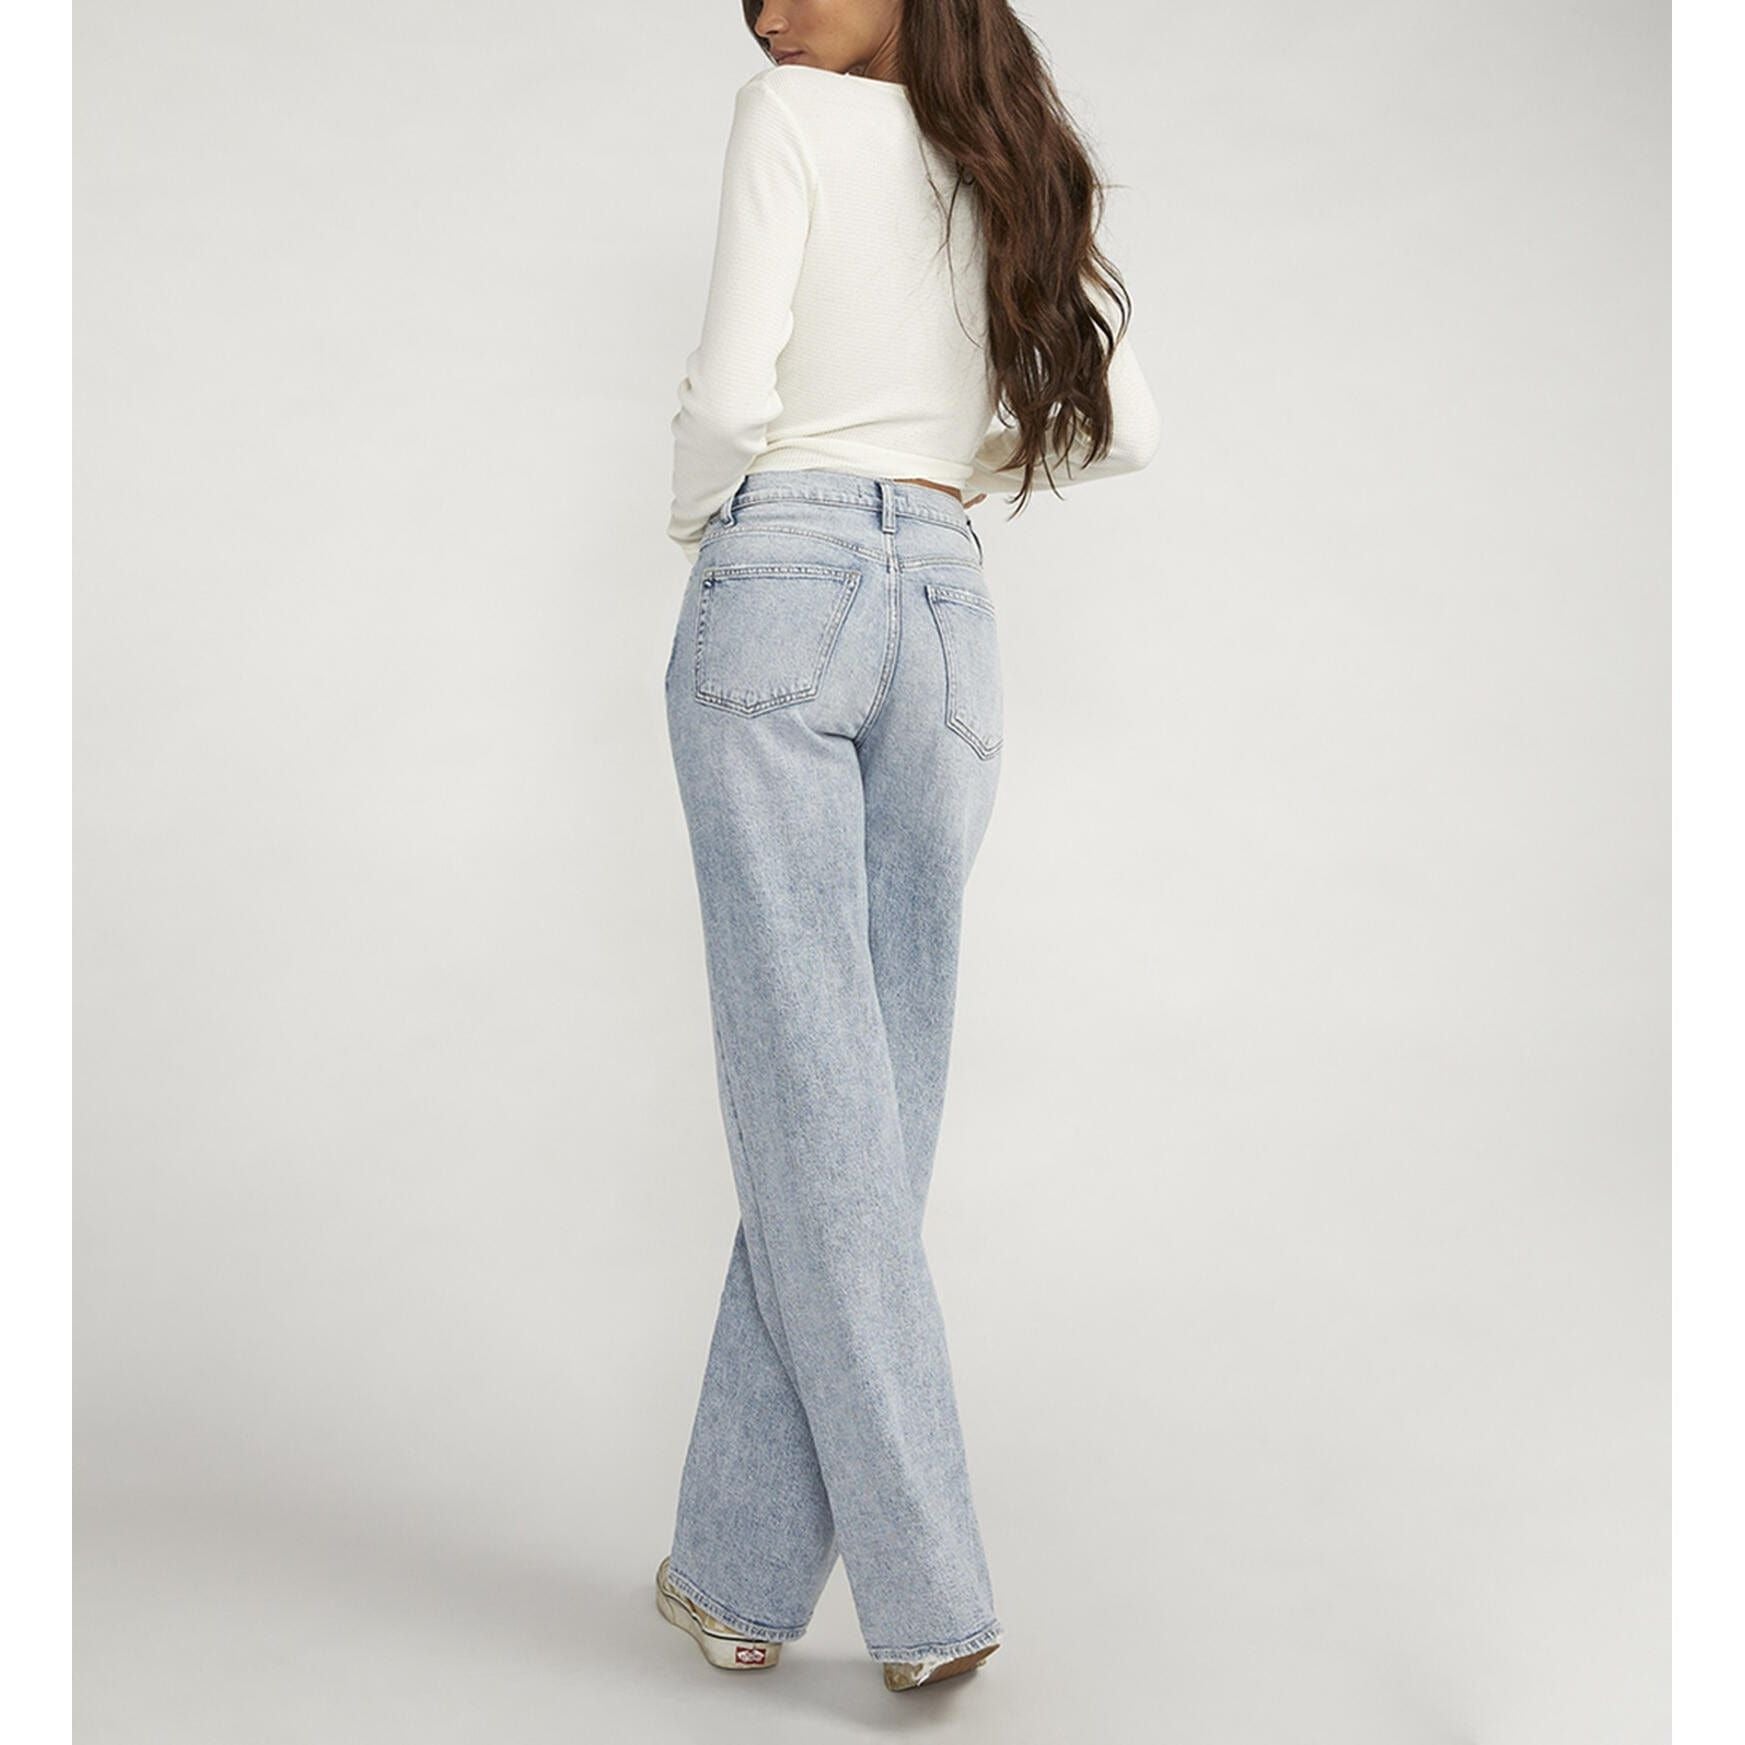 Silver Jeans Silver Highly Desirable Trouser